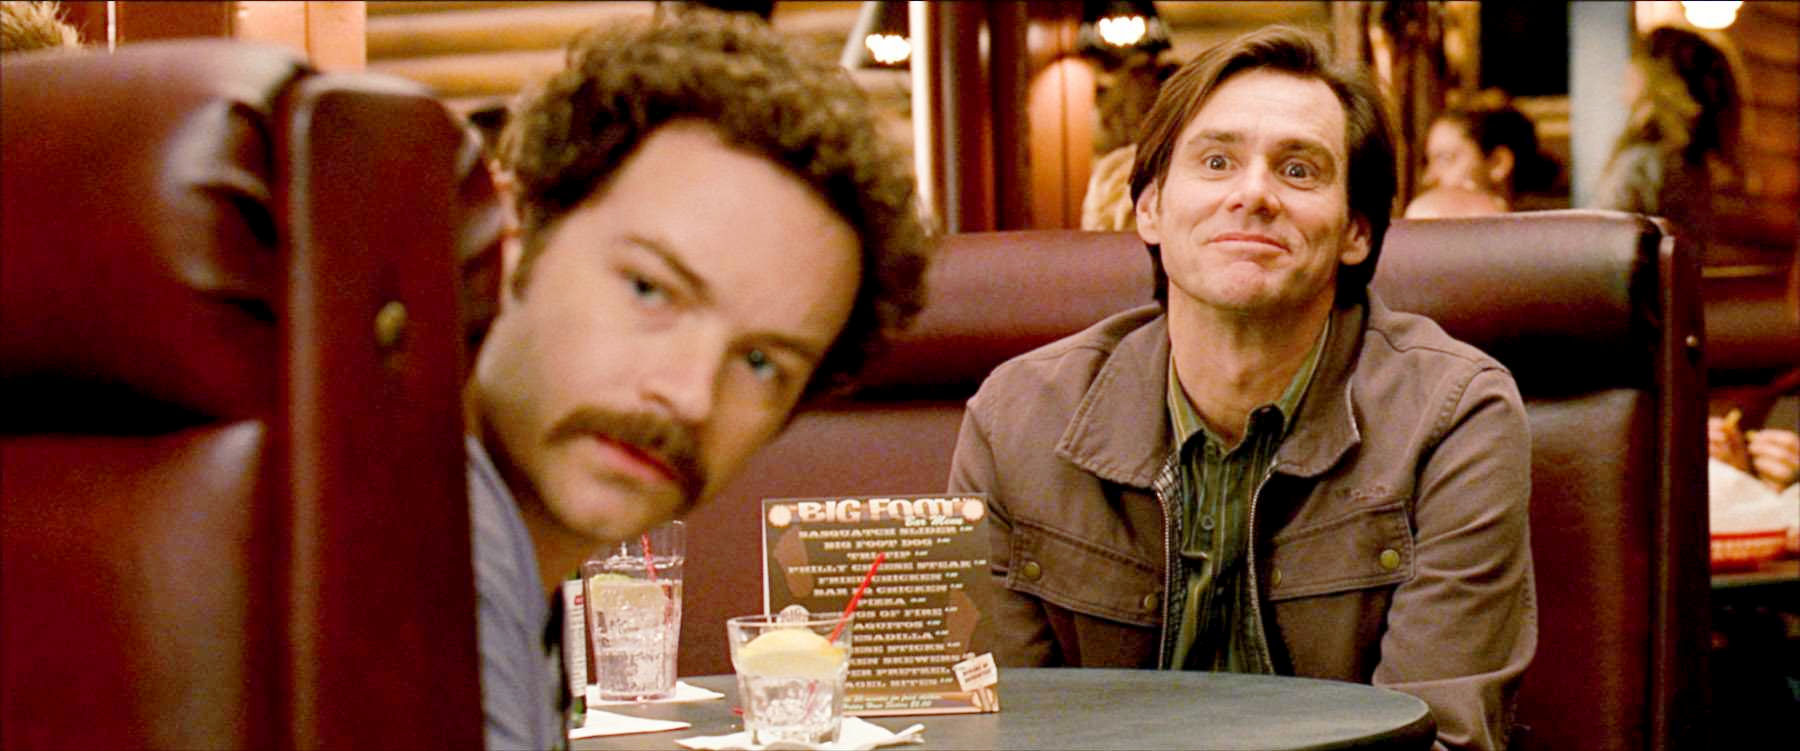 Danny Masterson stars as Rooney and Jim Carrey stars as Carl Allen in Warner Bros. Pictures' Yes Man (2008)